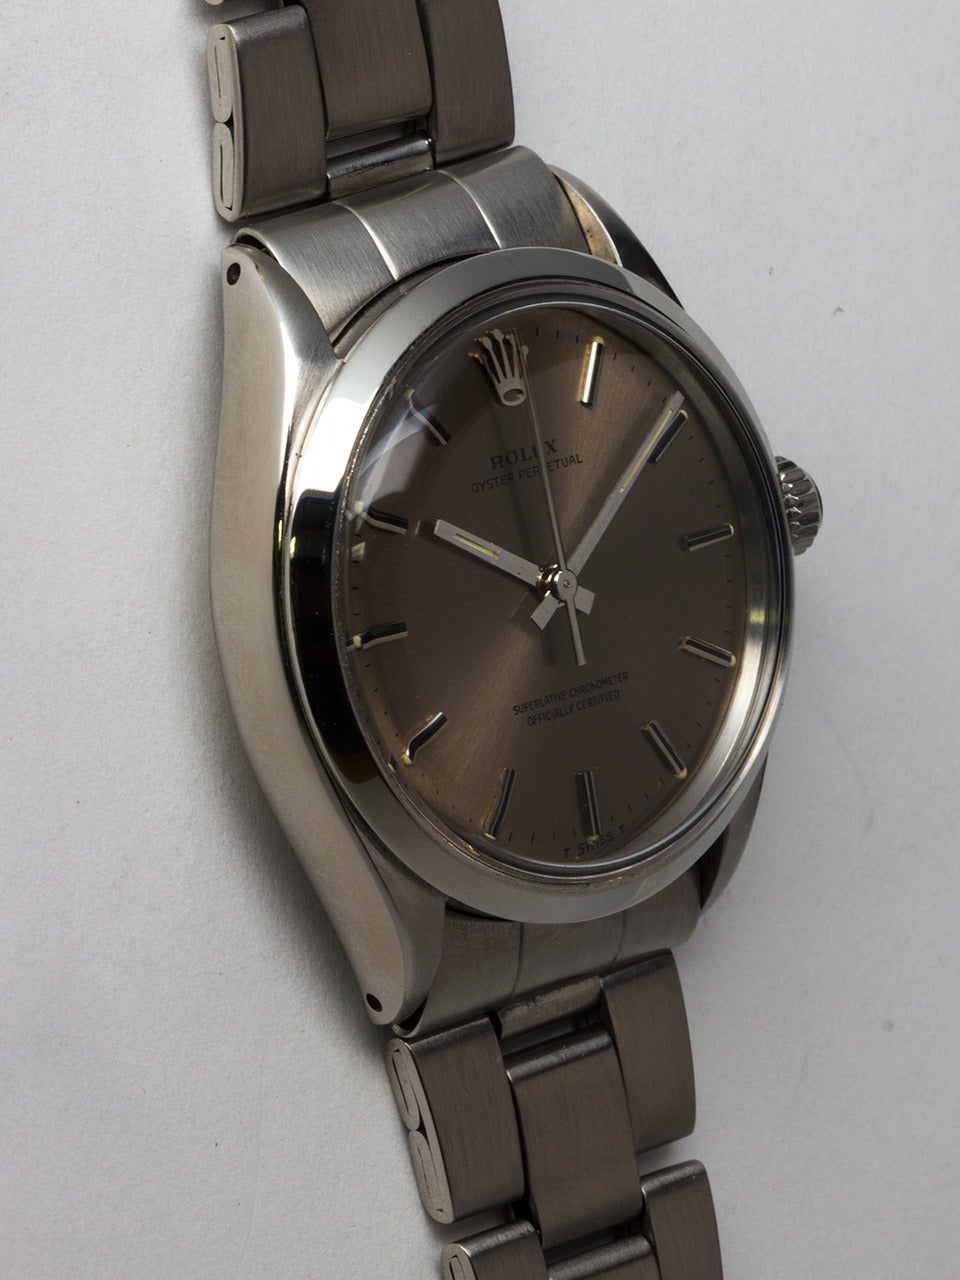 Rolex Stainless Steel Oyster Perpetual Wristwatch ref 1002 serial number 3.1 million circa 1971. 34mm diameter case with smooth bezel and acrylic crystal. Original gray dial with applied silver indexes and silver baton hands. Powered by self winding